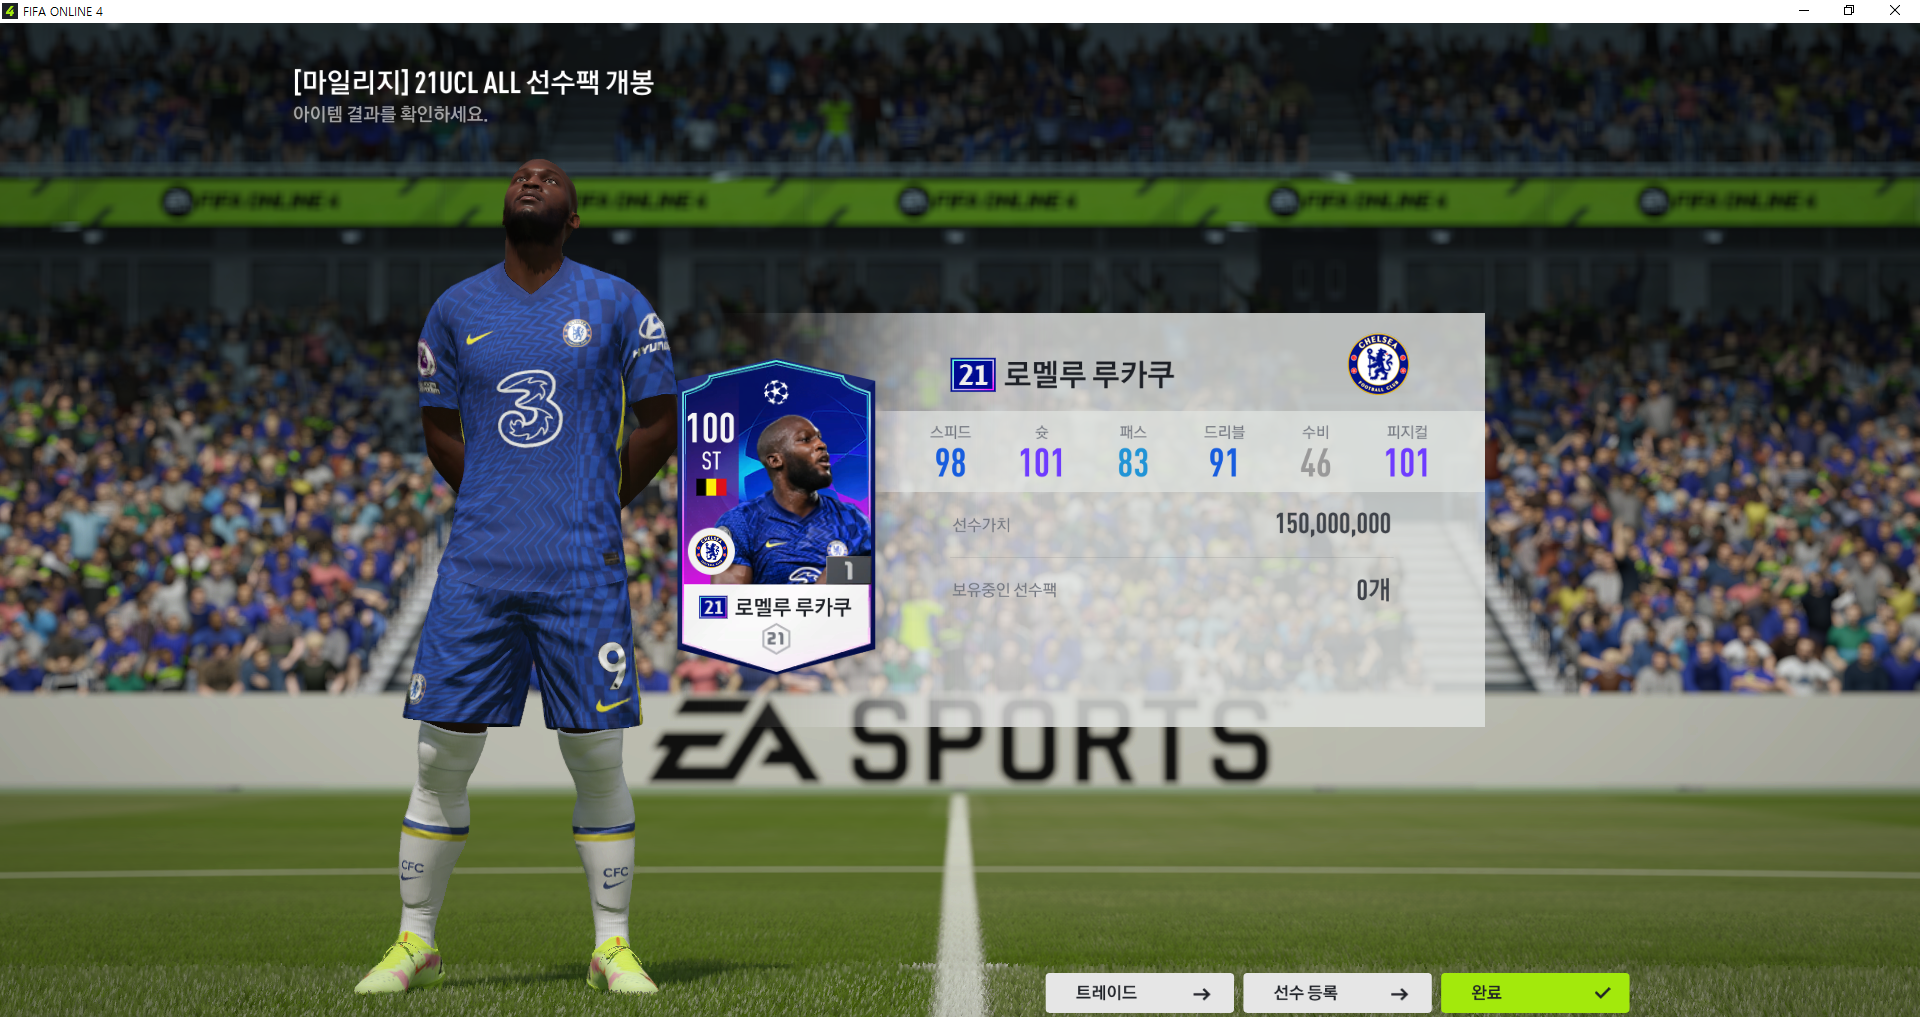 FIFA ONLINE 4 2022-02-24 오후 3_31_48.png